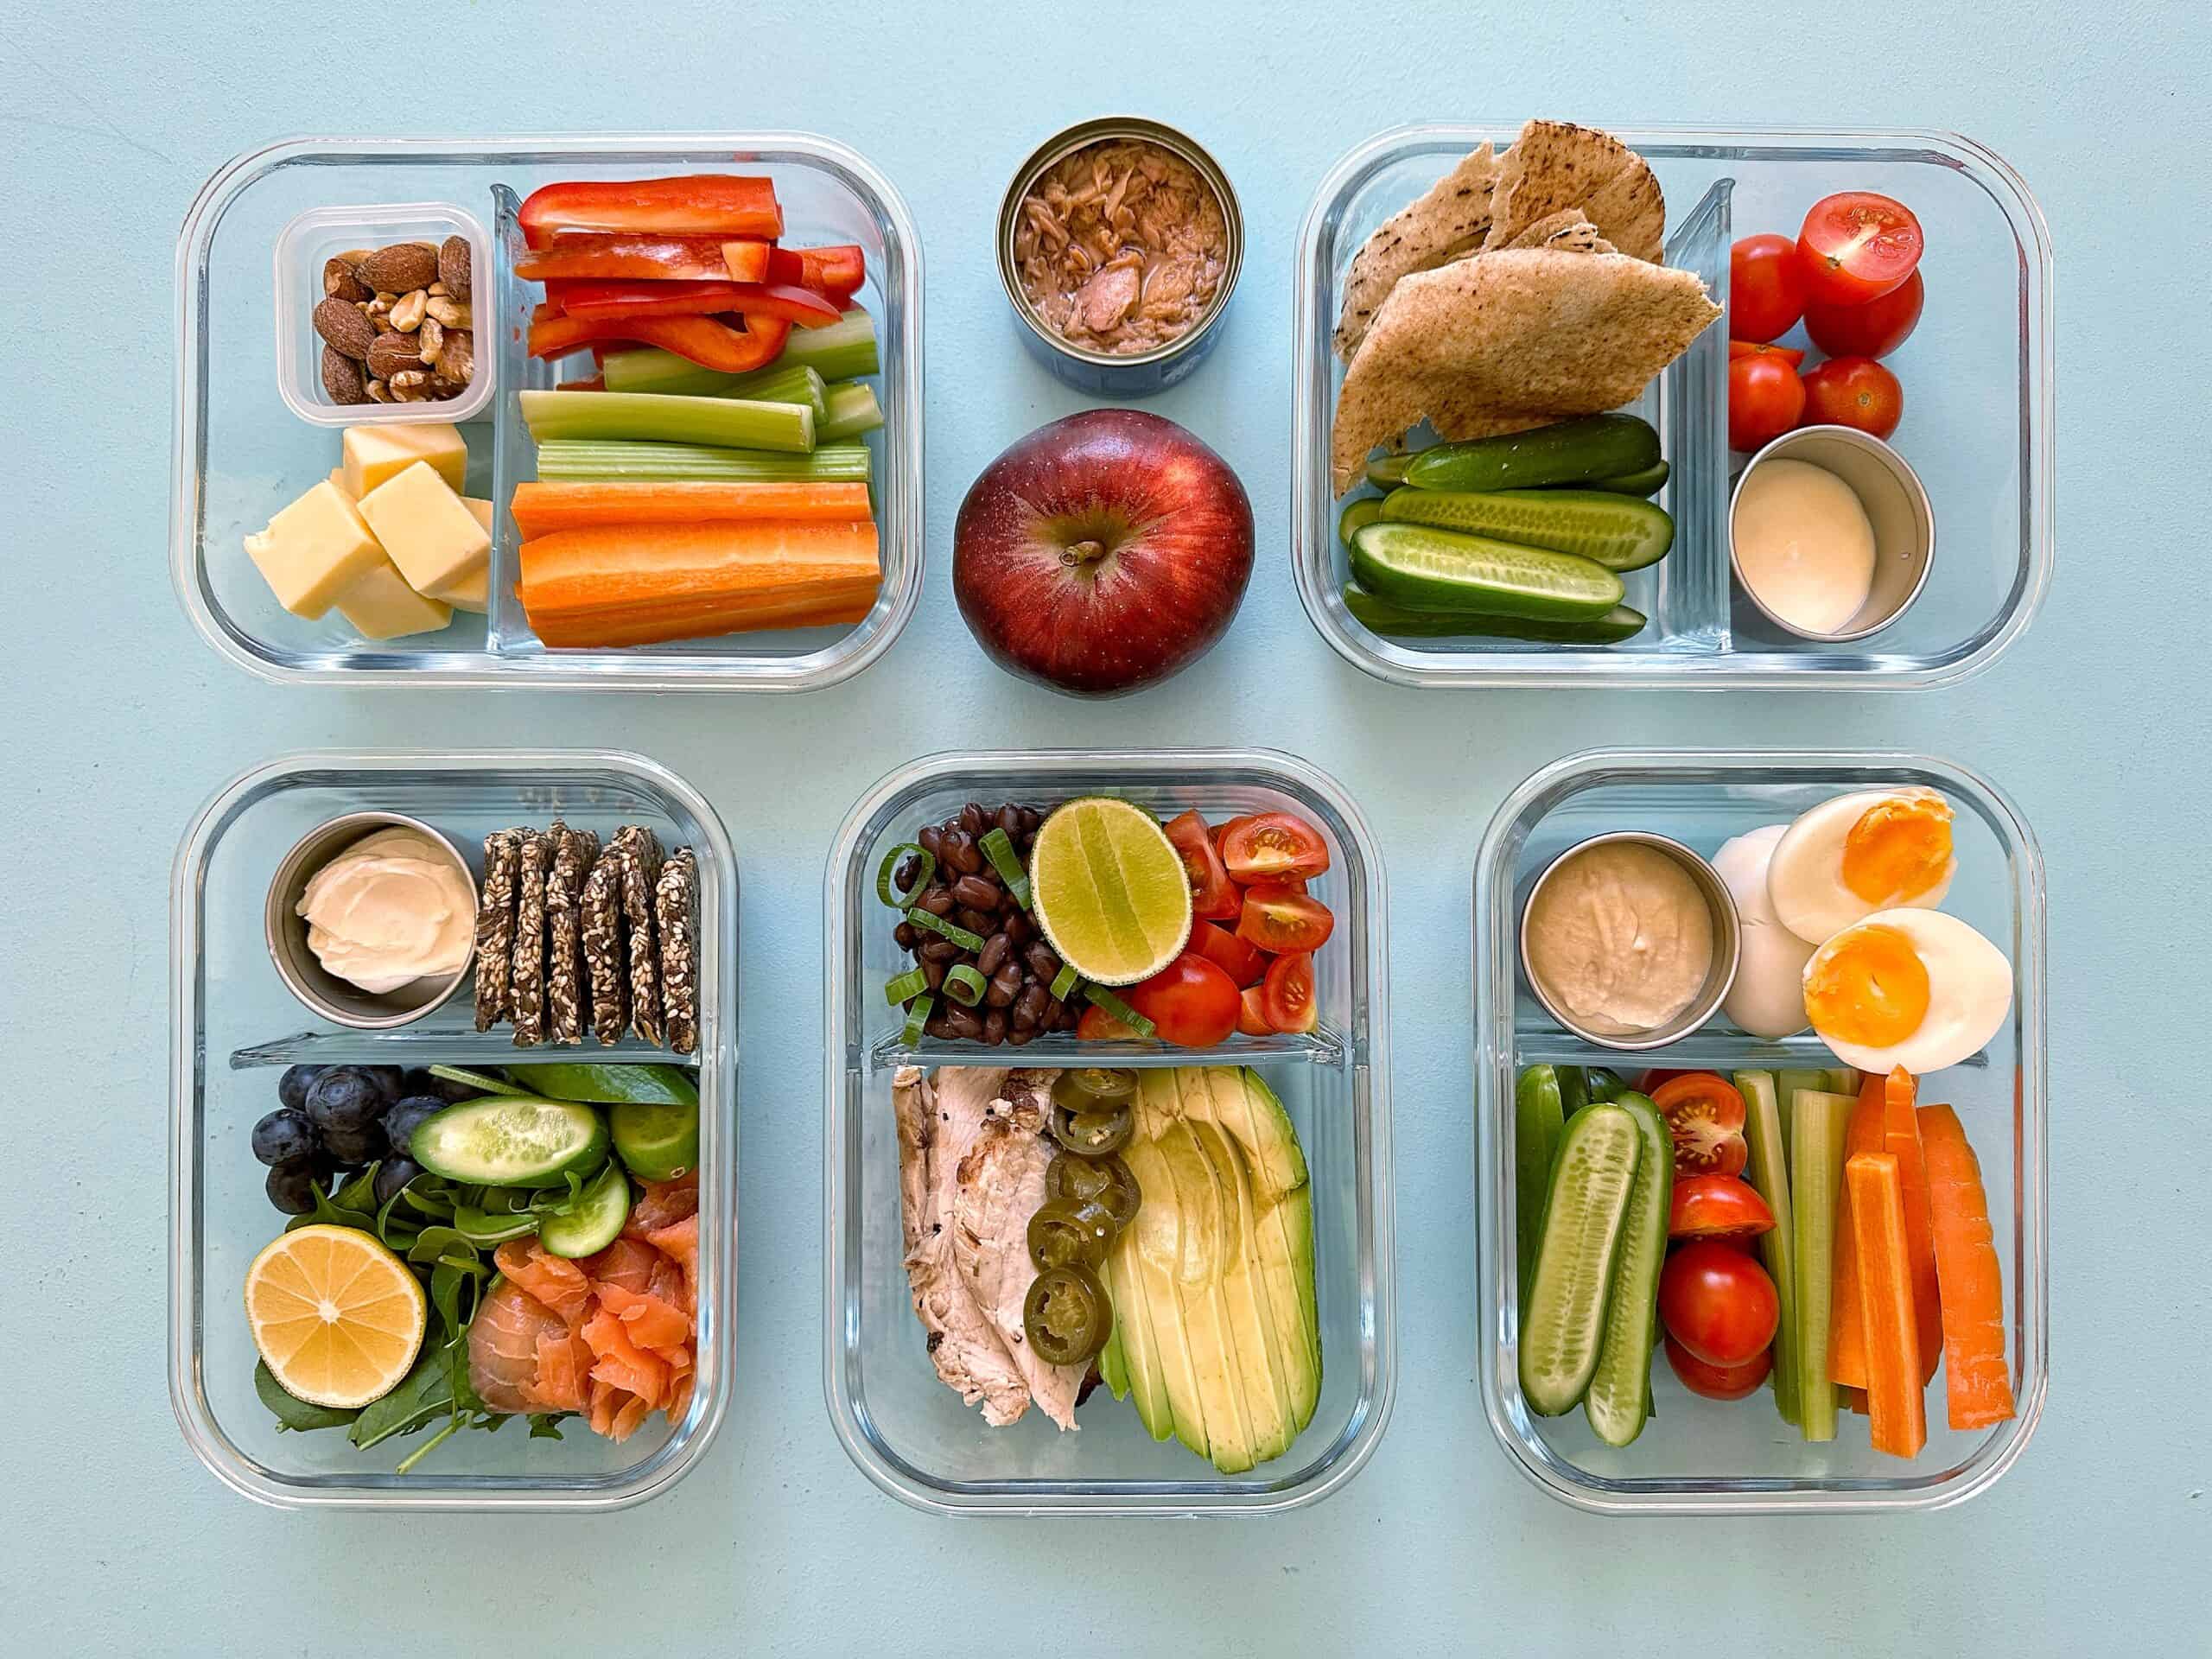 How to make a healthy, fasting day lunchbox - The Fast 800